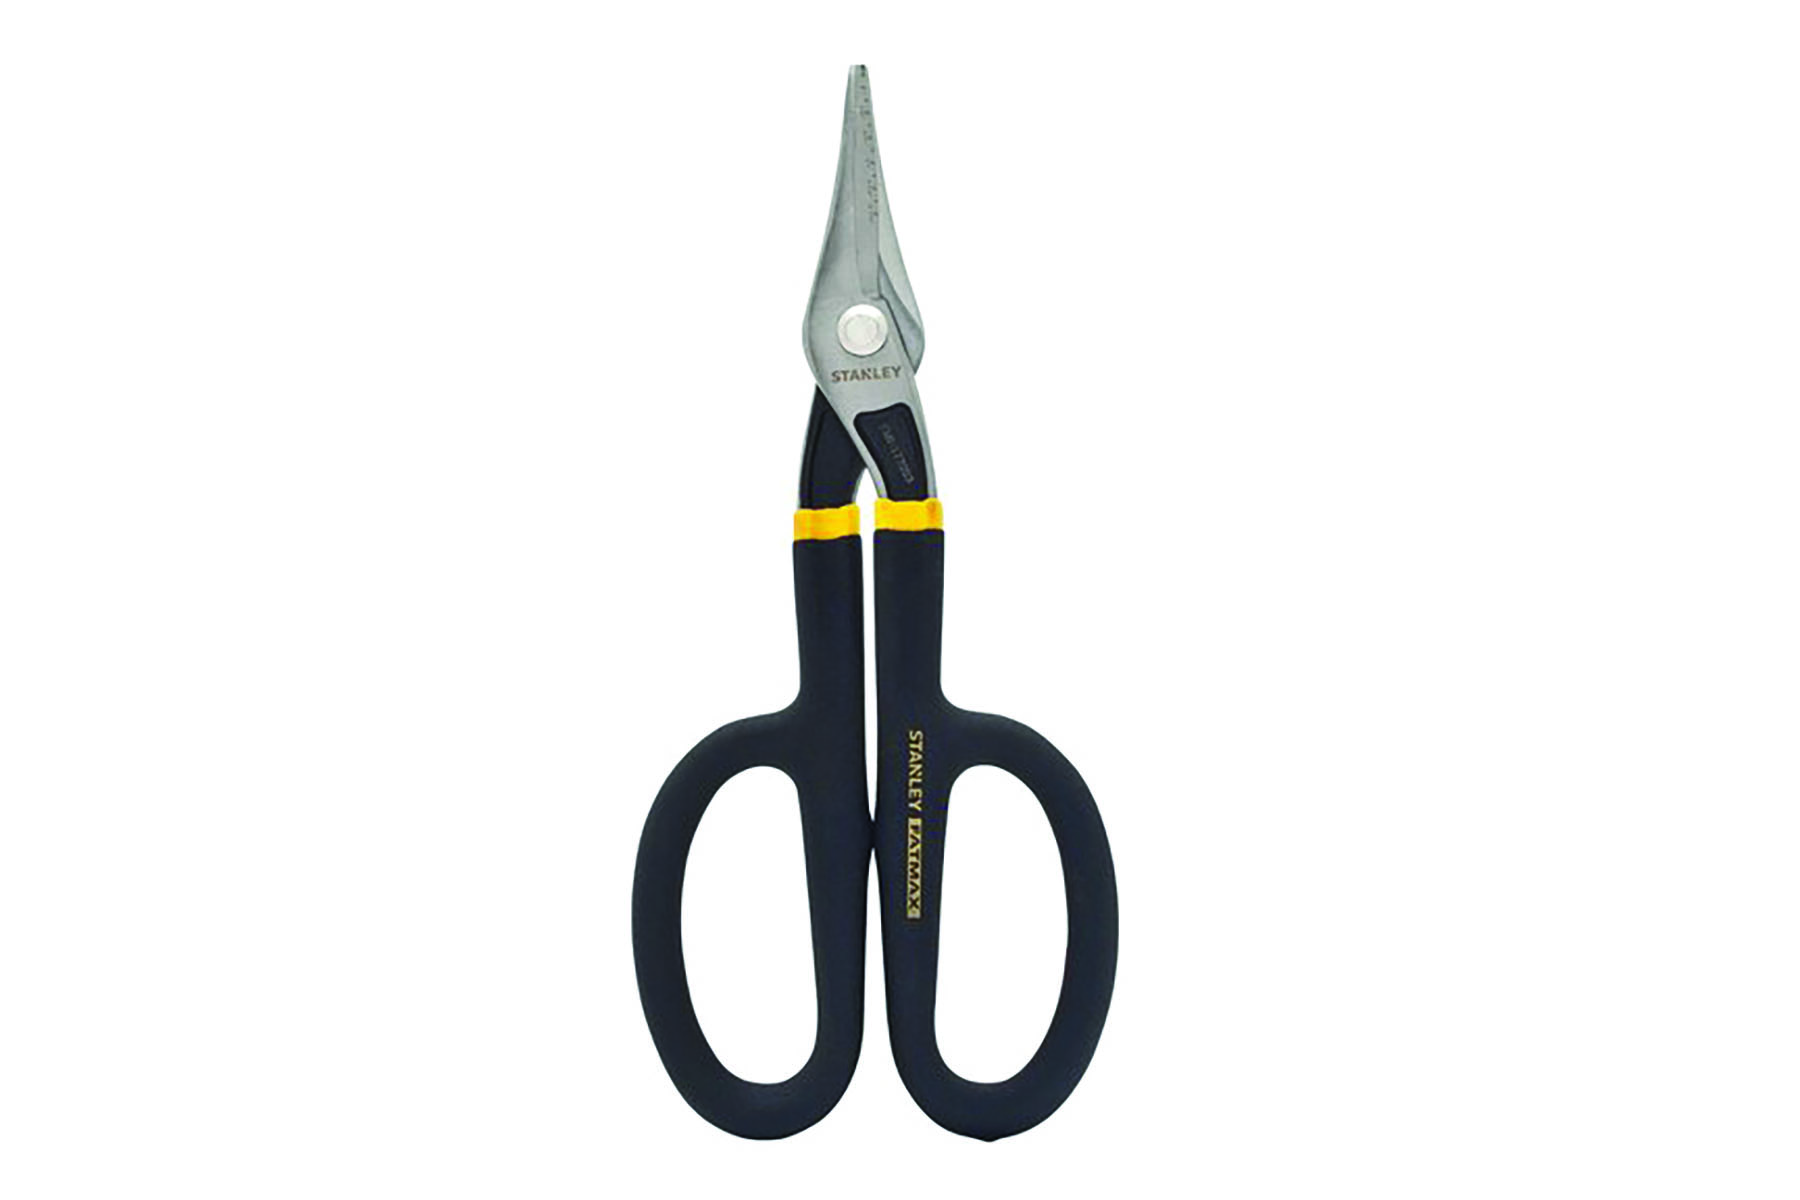 Black and yellow duckbill snips. Image by Stanley.